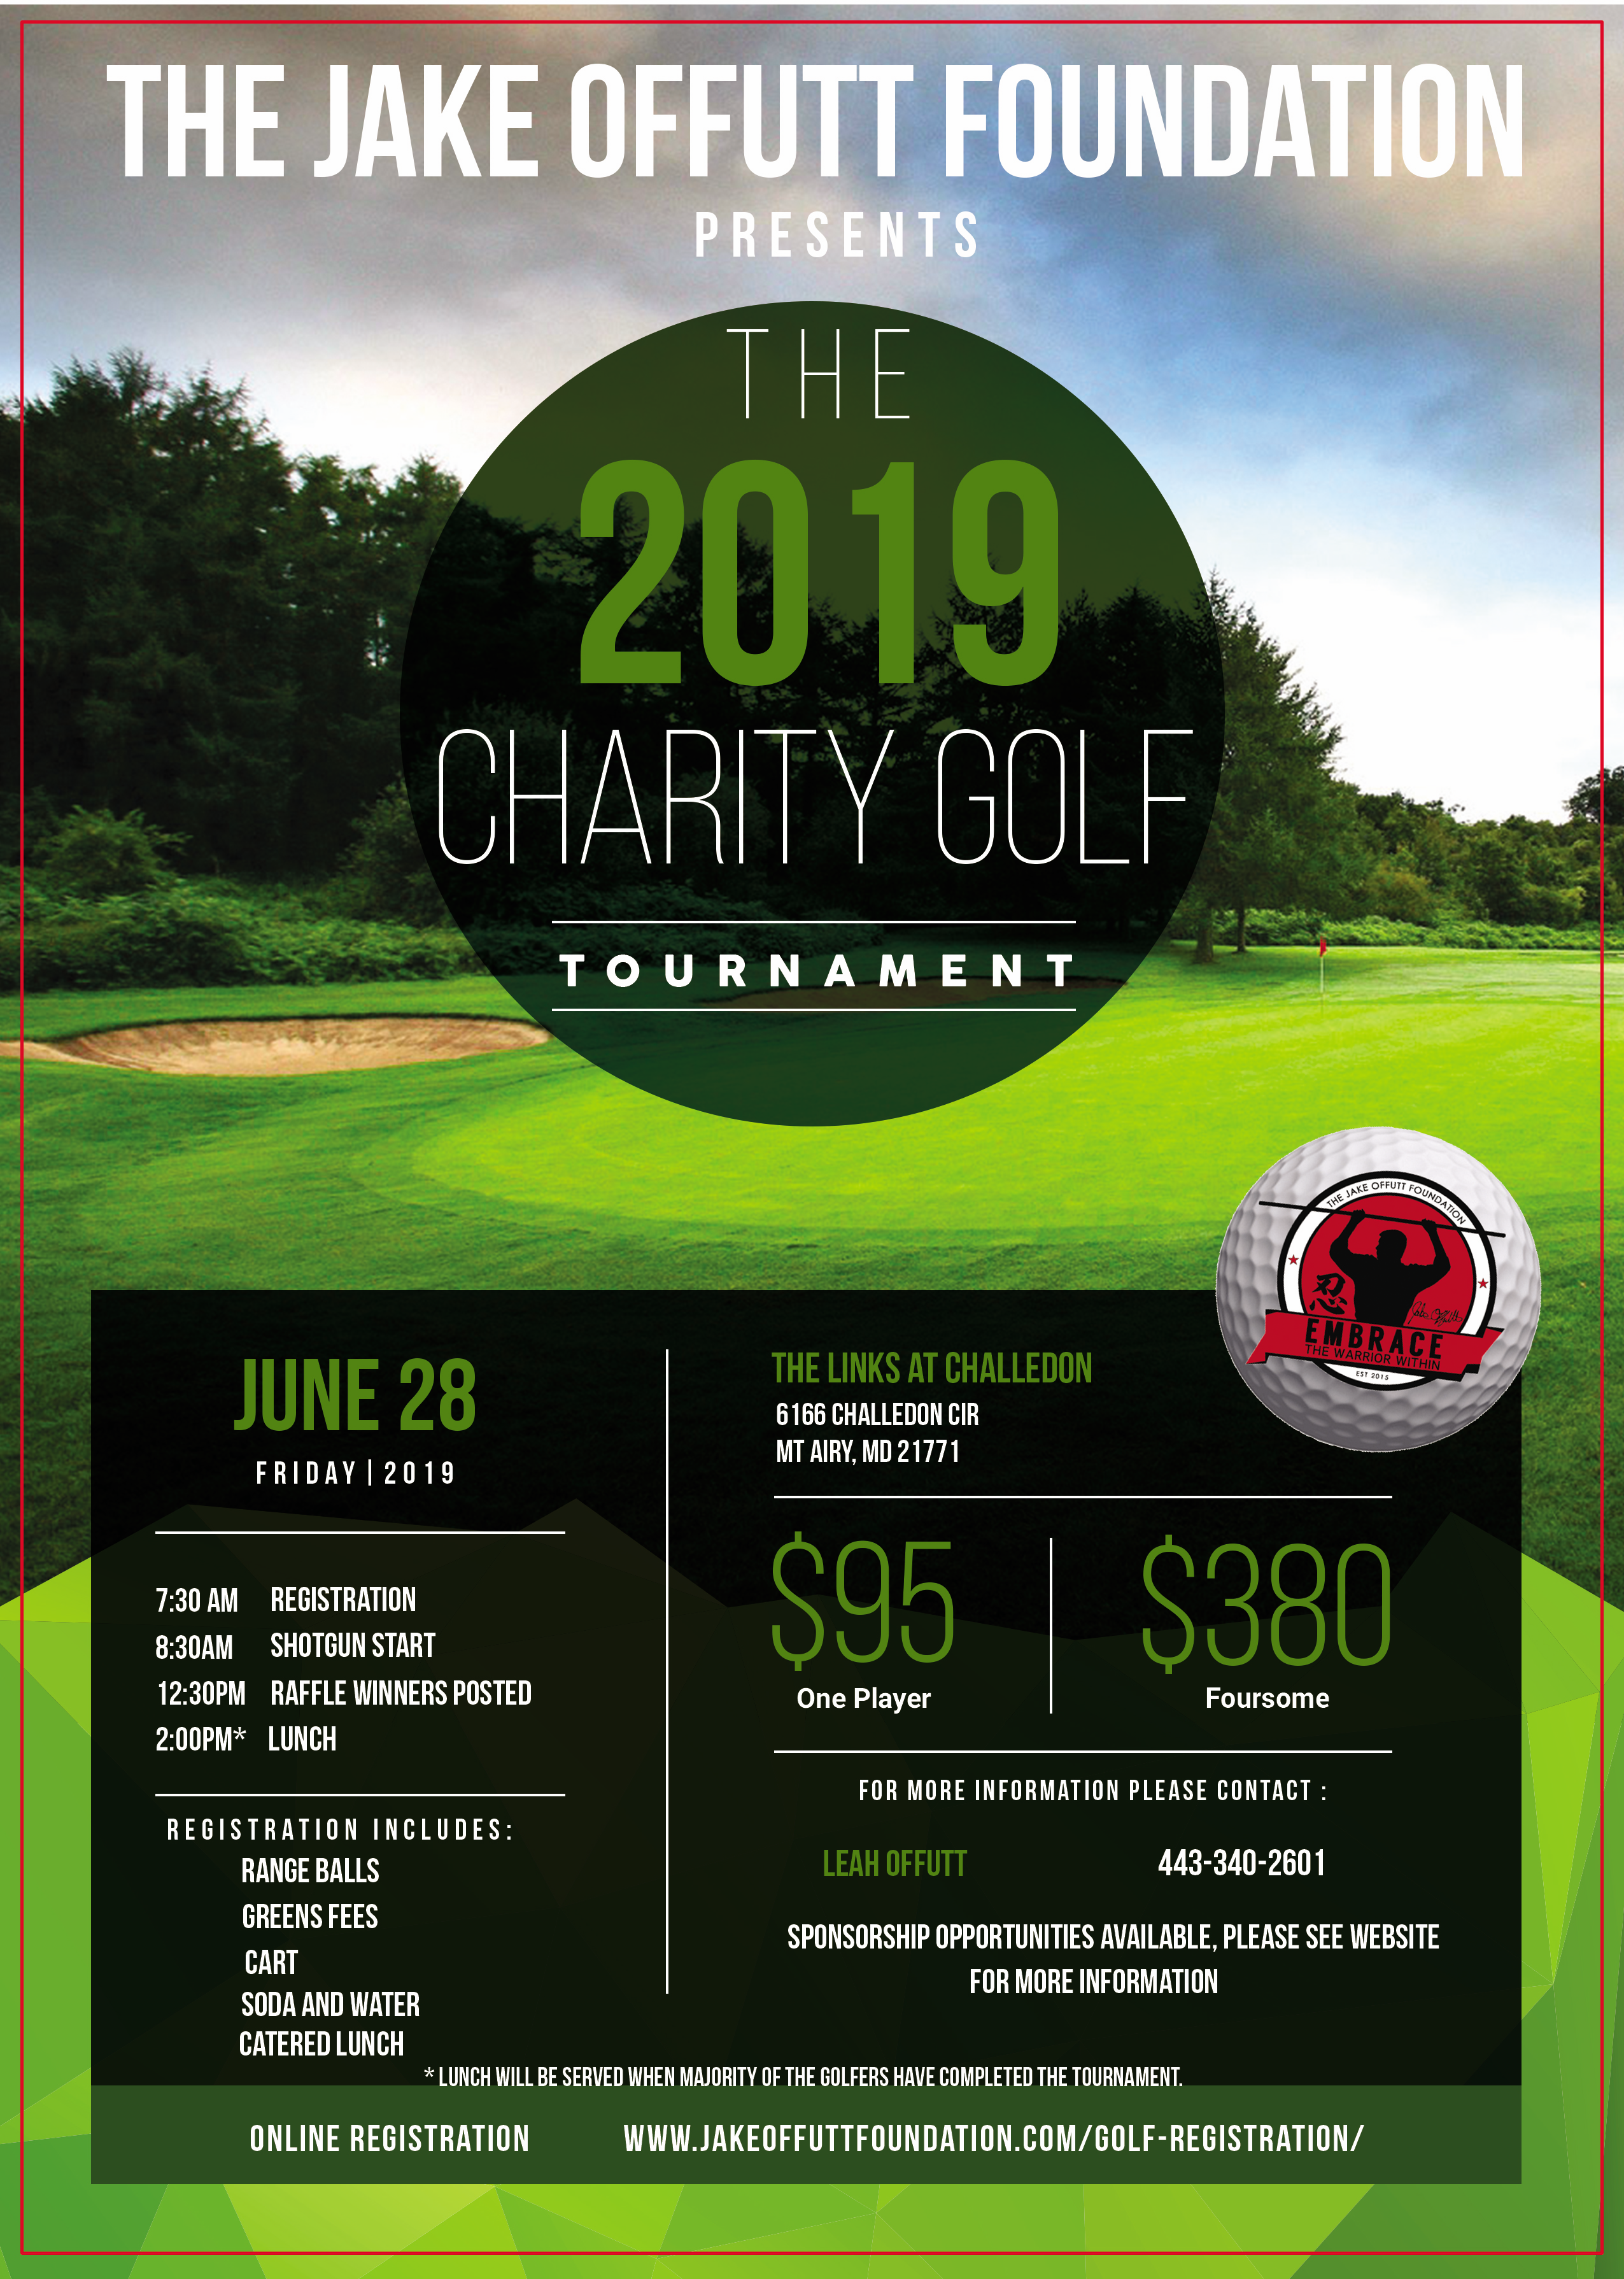 charity golf flyer template, charity golf tournament flyer template, charity golf outing flyer template, golf outing flyer template microsoft word, golf outing fundraiser flyer template, charity event flyer template